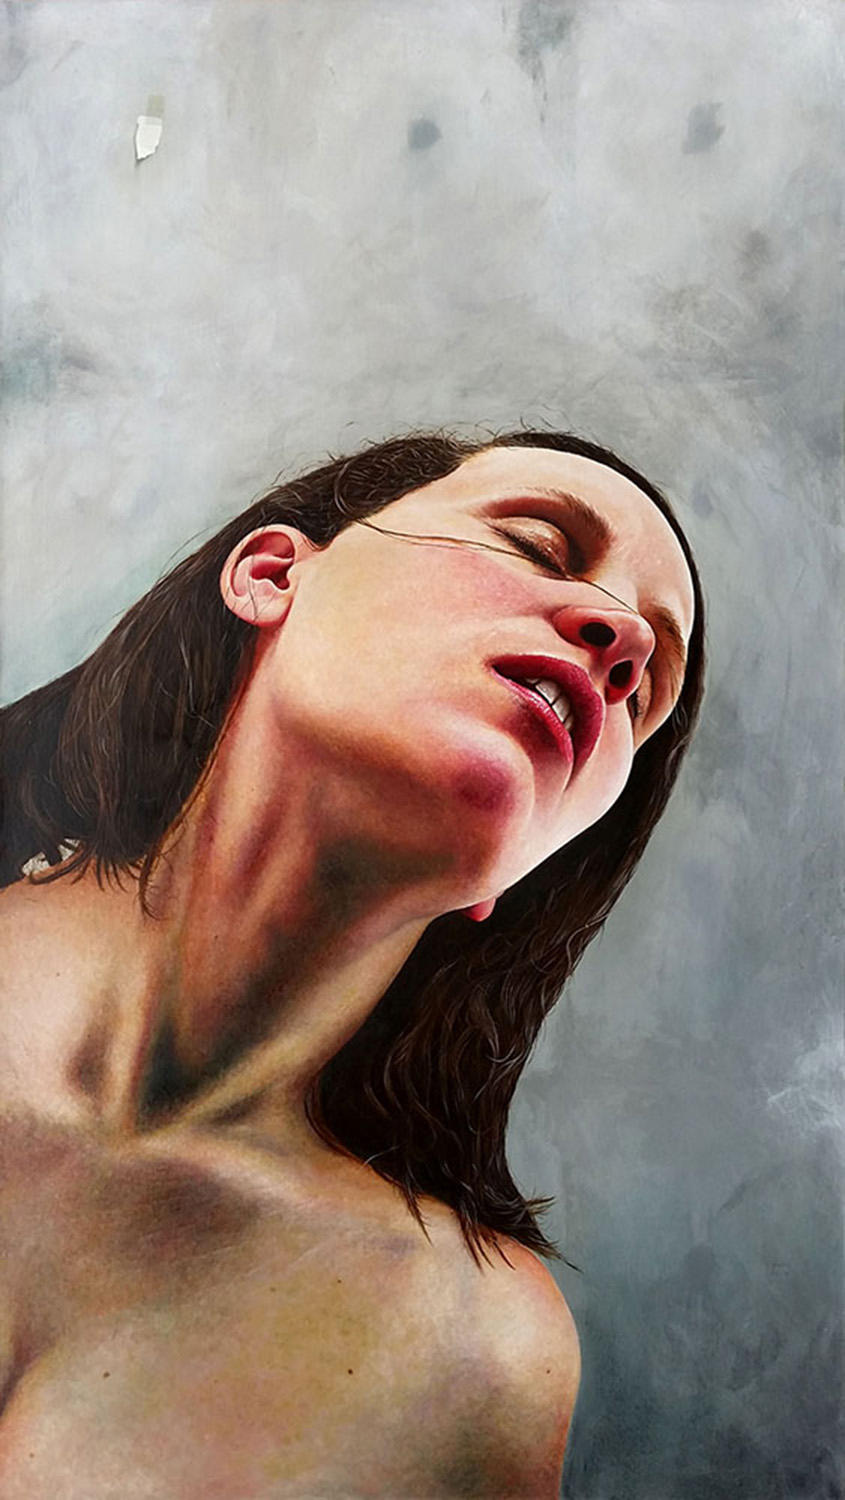 Unattainable thoughts | Oil on canvas | 100 x 180 cm